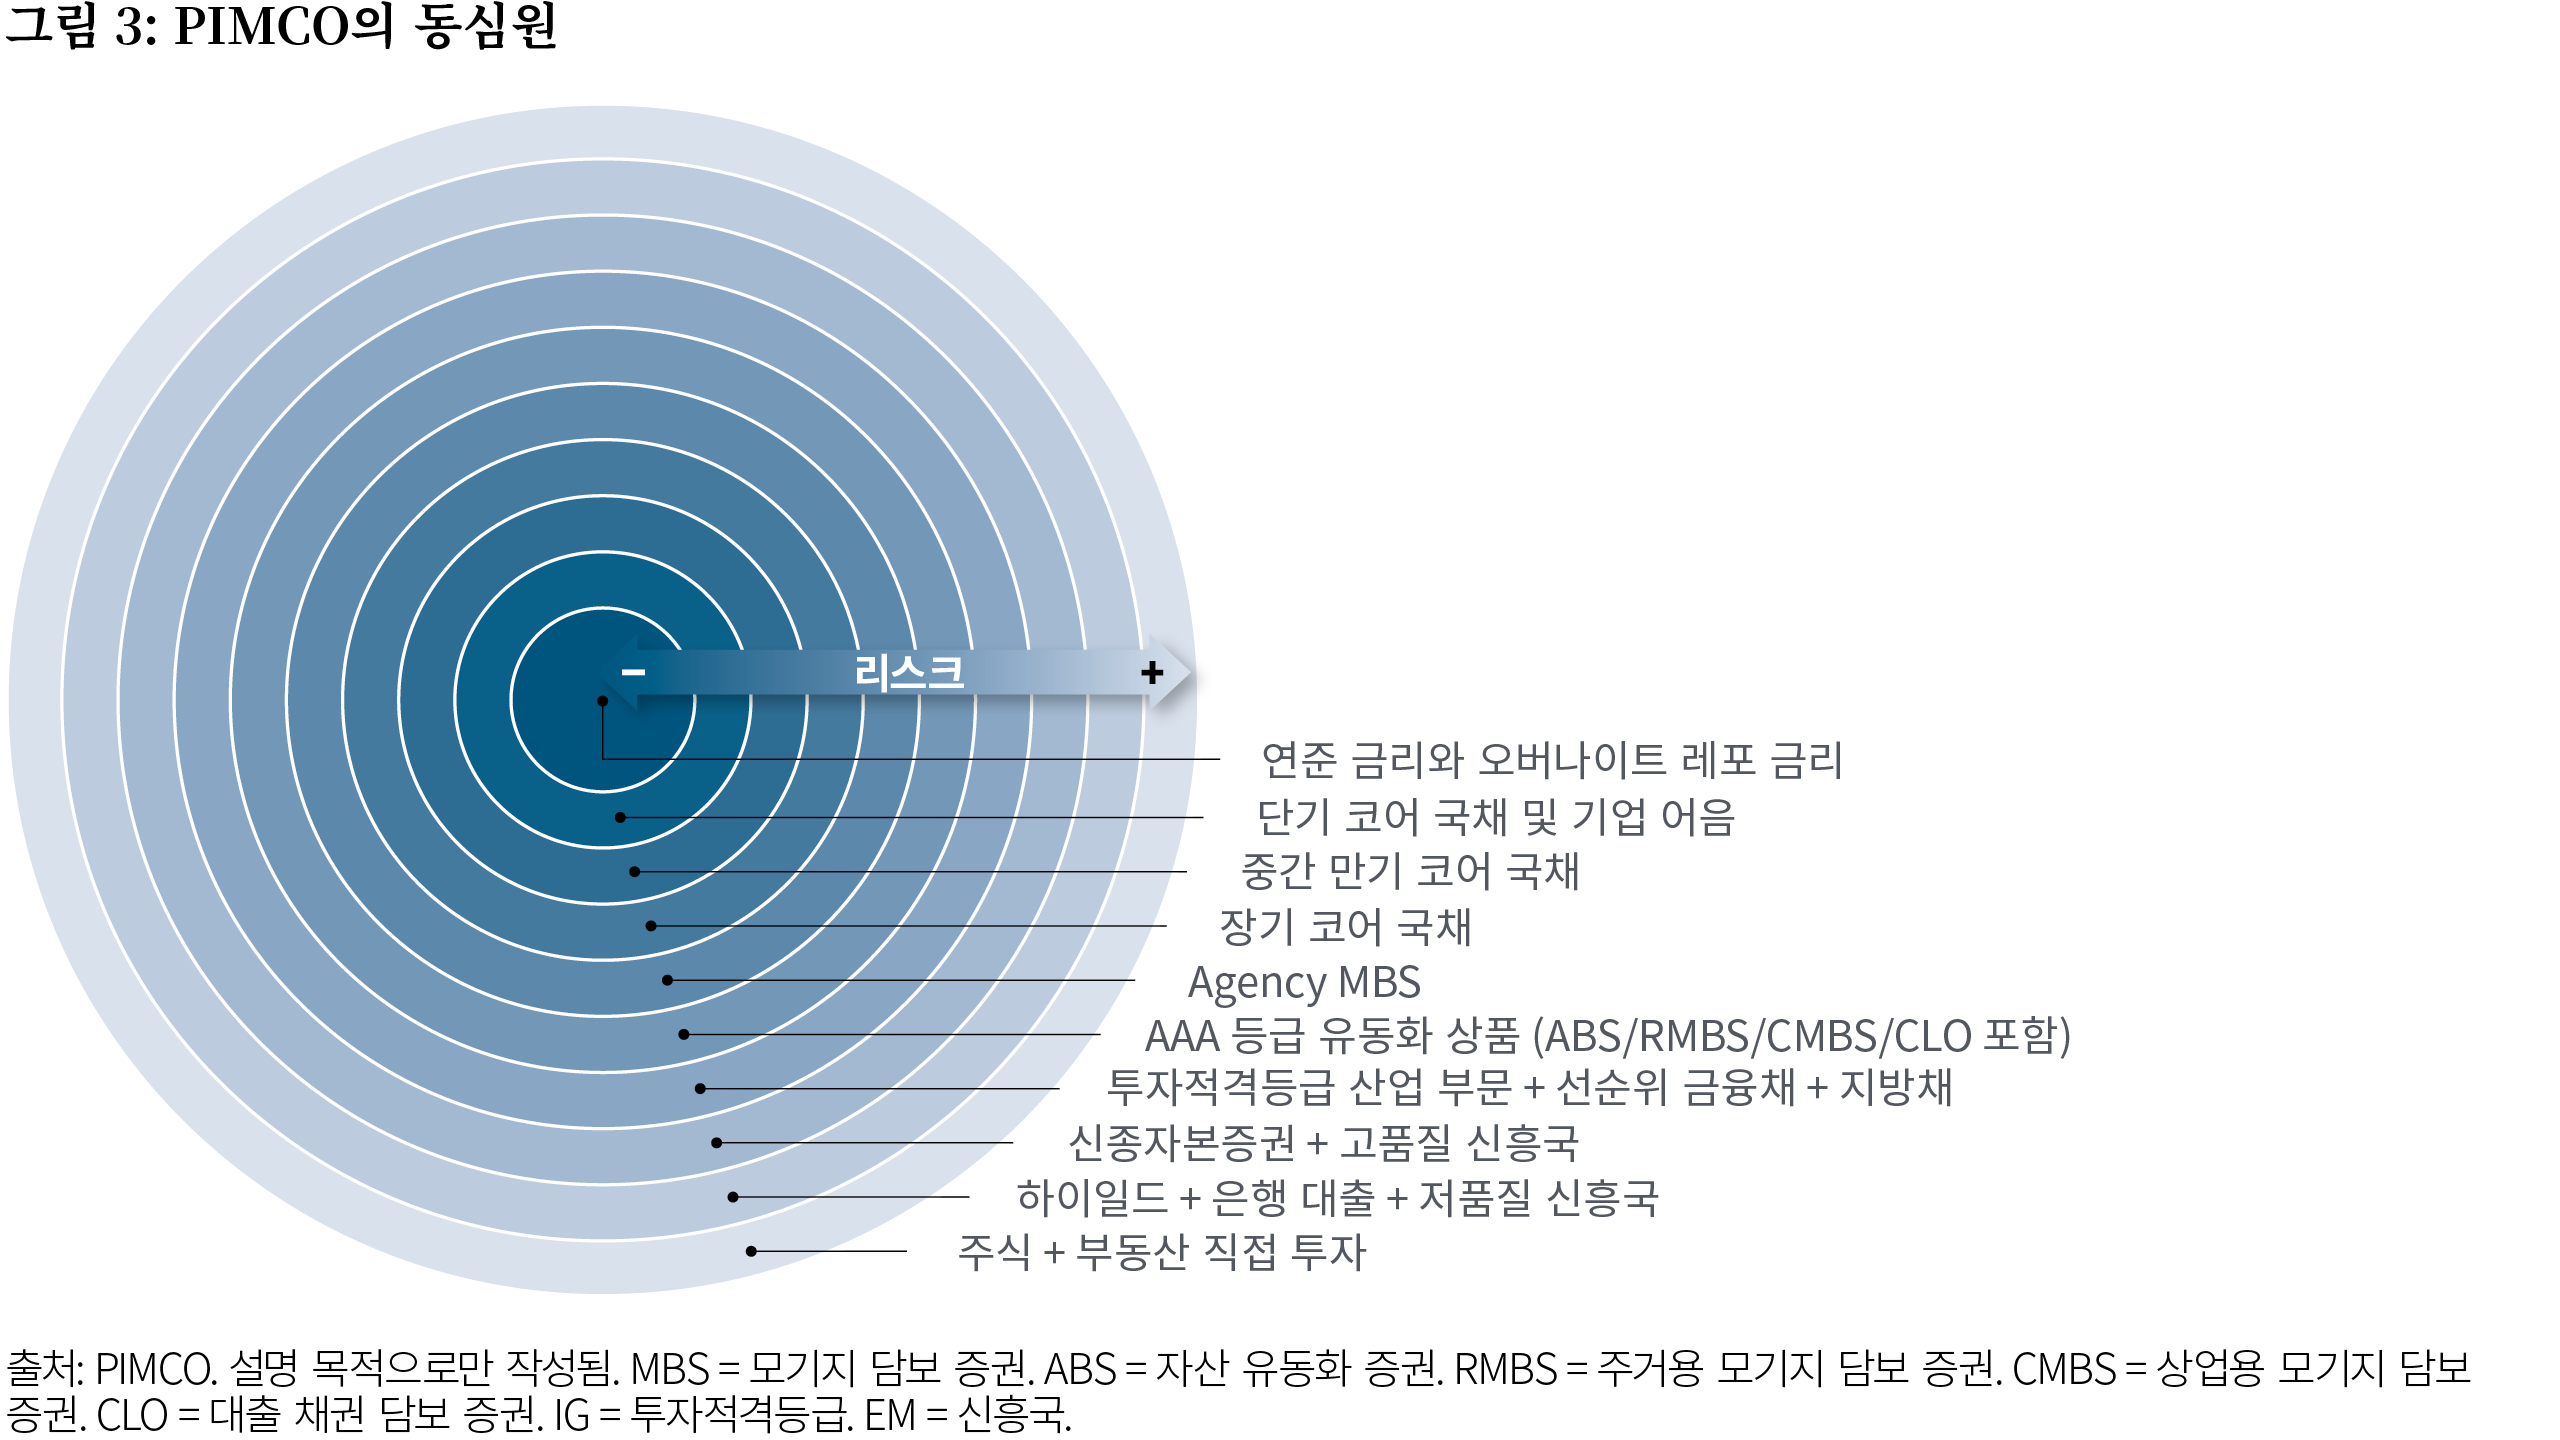 Figure 3 depicts PIMCO’s concept of concentric circles, which places the least risky, most liquid asset classes at the center, including overnight repurchase (repo) rates, commercial paper, and ultra-short and short-term bonds, then expanding to somewhat riskier assets including longer-term sovereign bonds, mortgage-backed securities, and investment grade corporates, and populating the outer rings with less liquid, higher-risk assets, such as high yield corporates, emerging market investments, equities, and real estate.